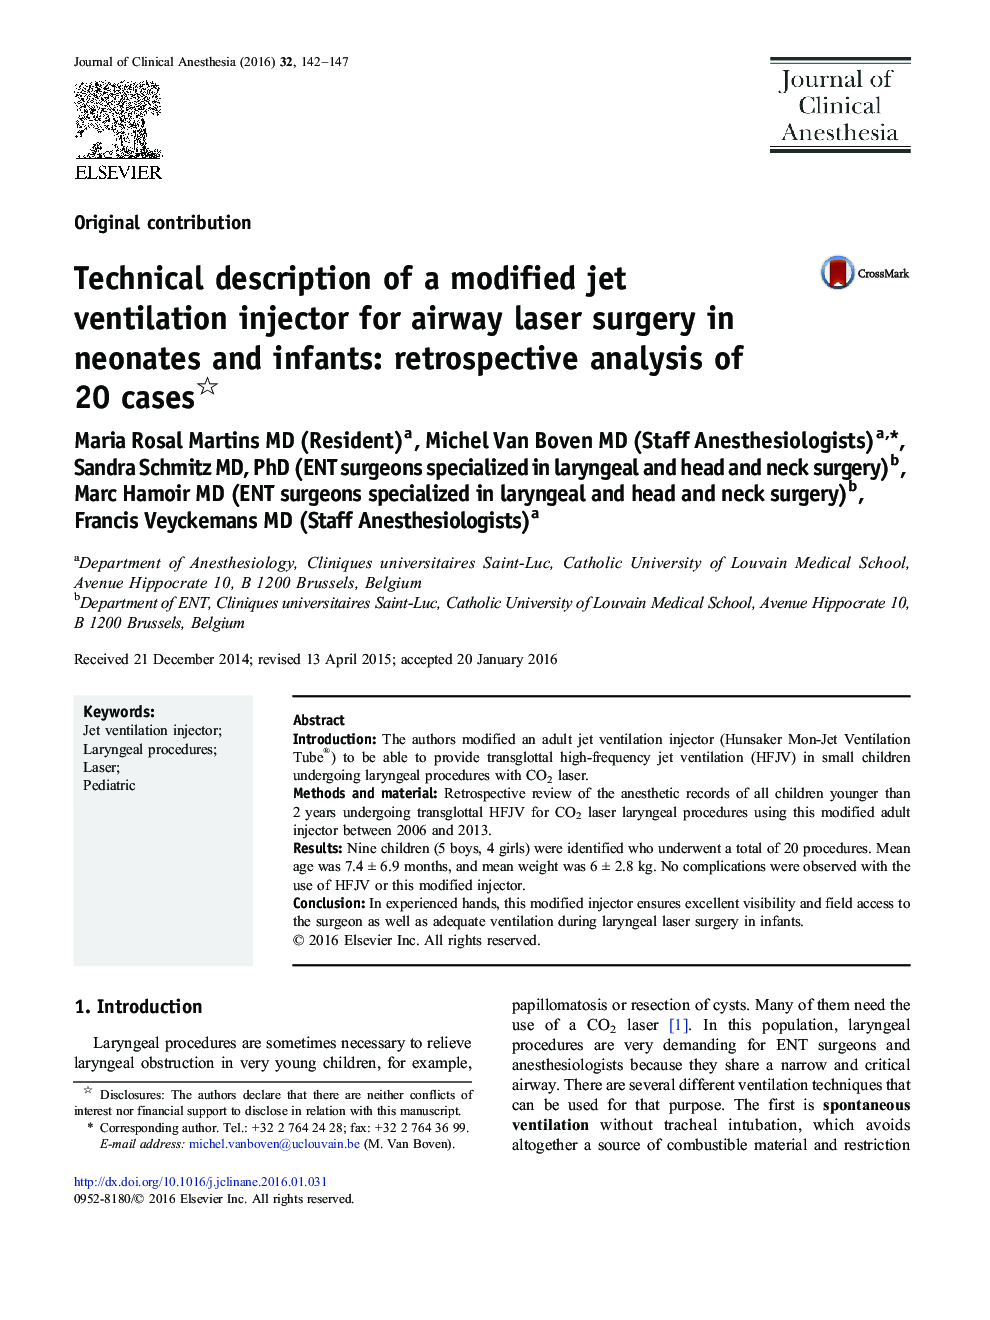 Technical description of a modified jet ventilation injector for airway laser surgery in neonates and infants: retrospective analysis of 20 cases